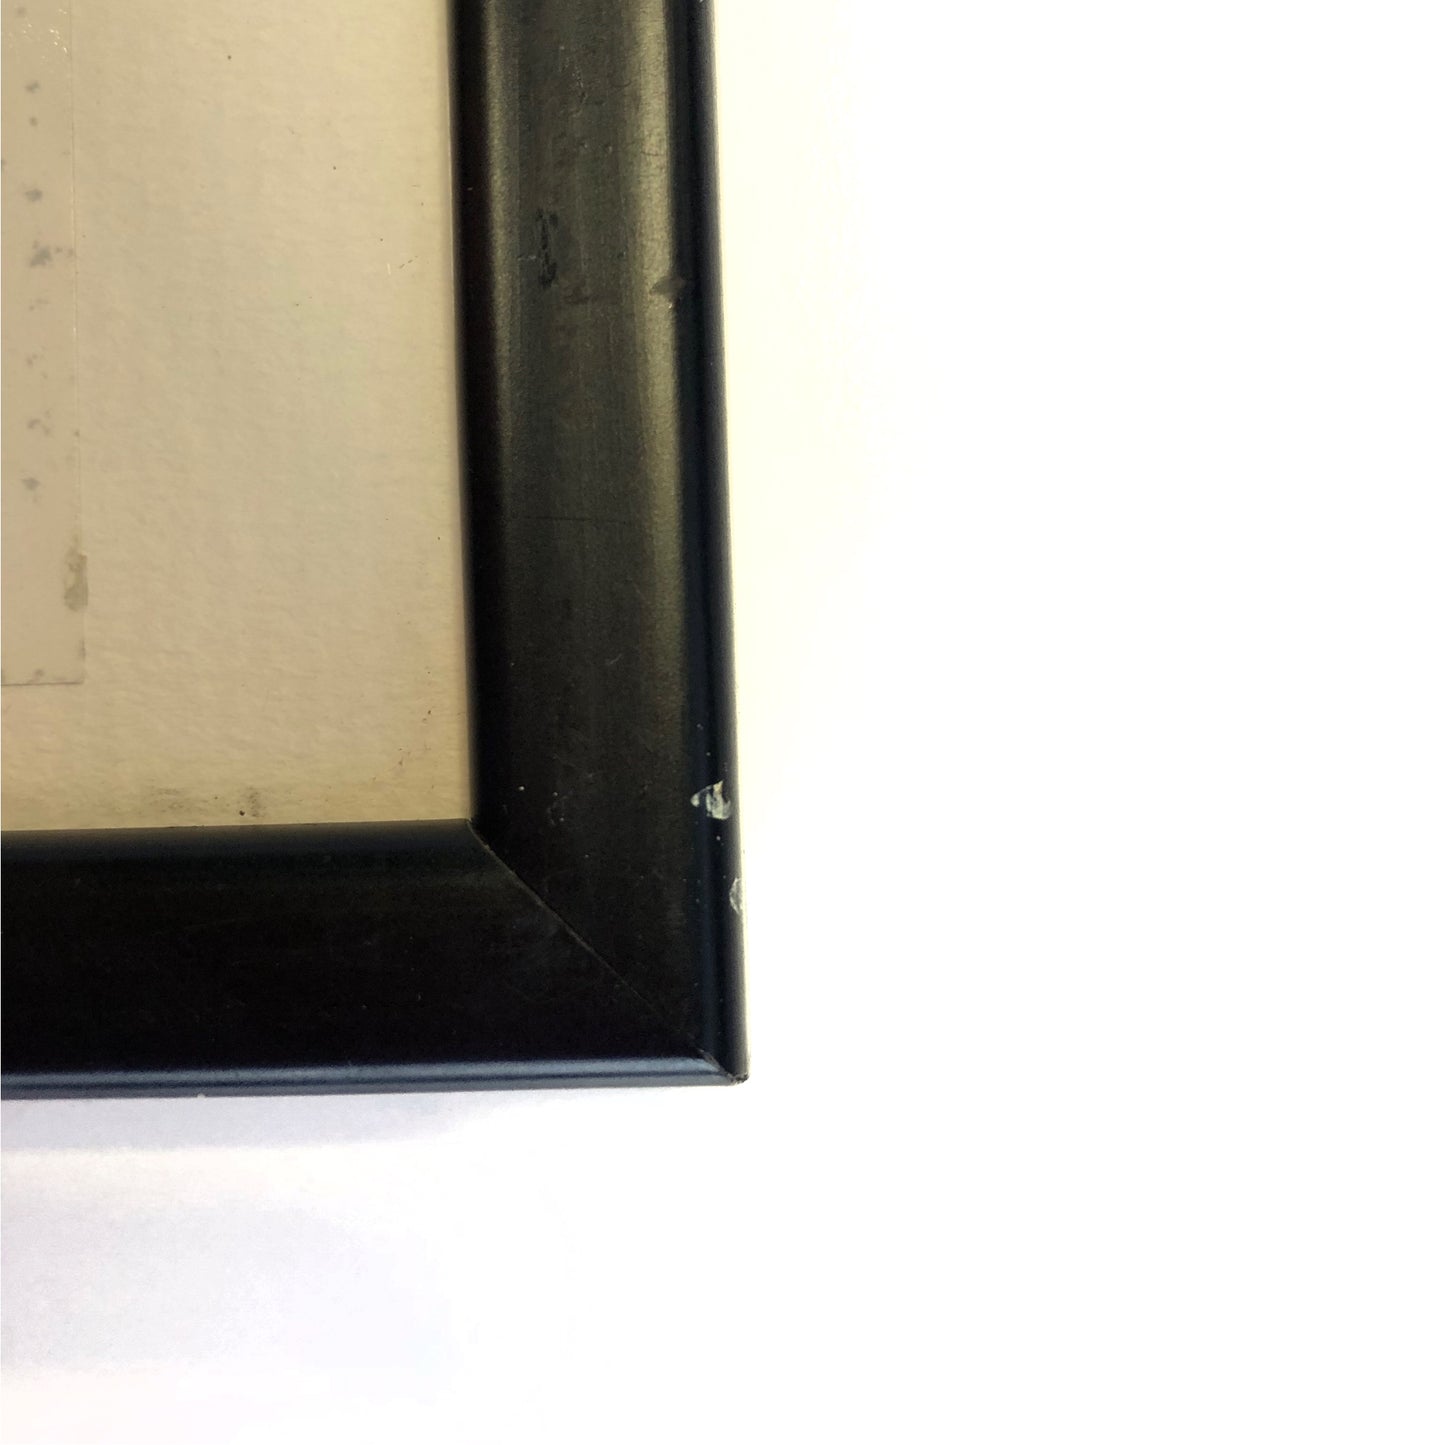 Condition of photo frame